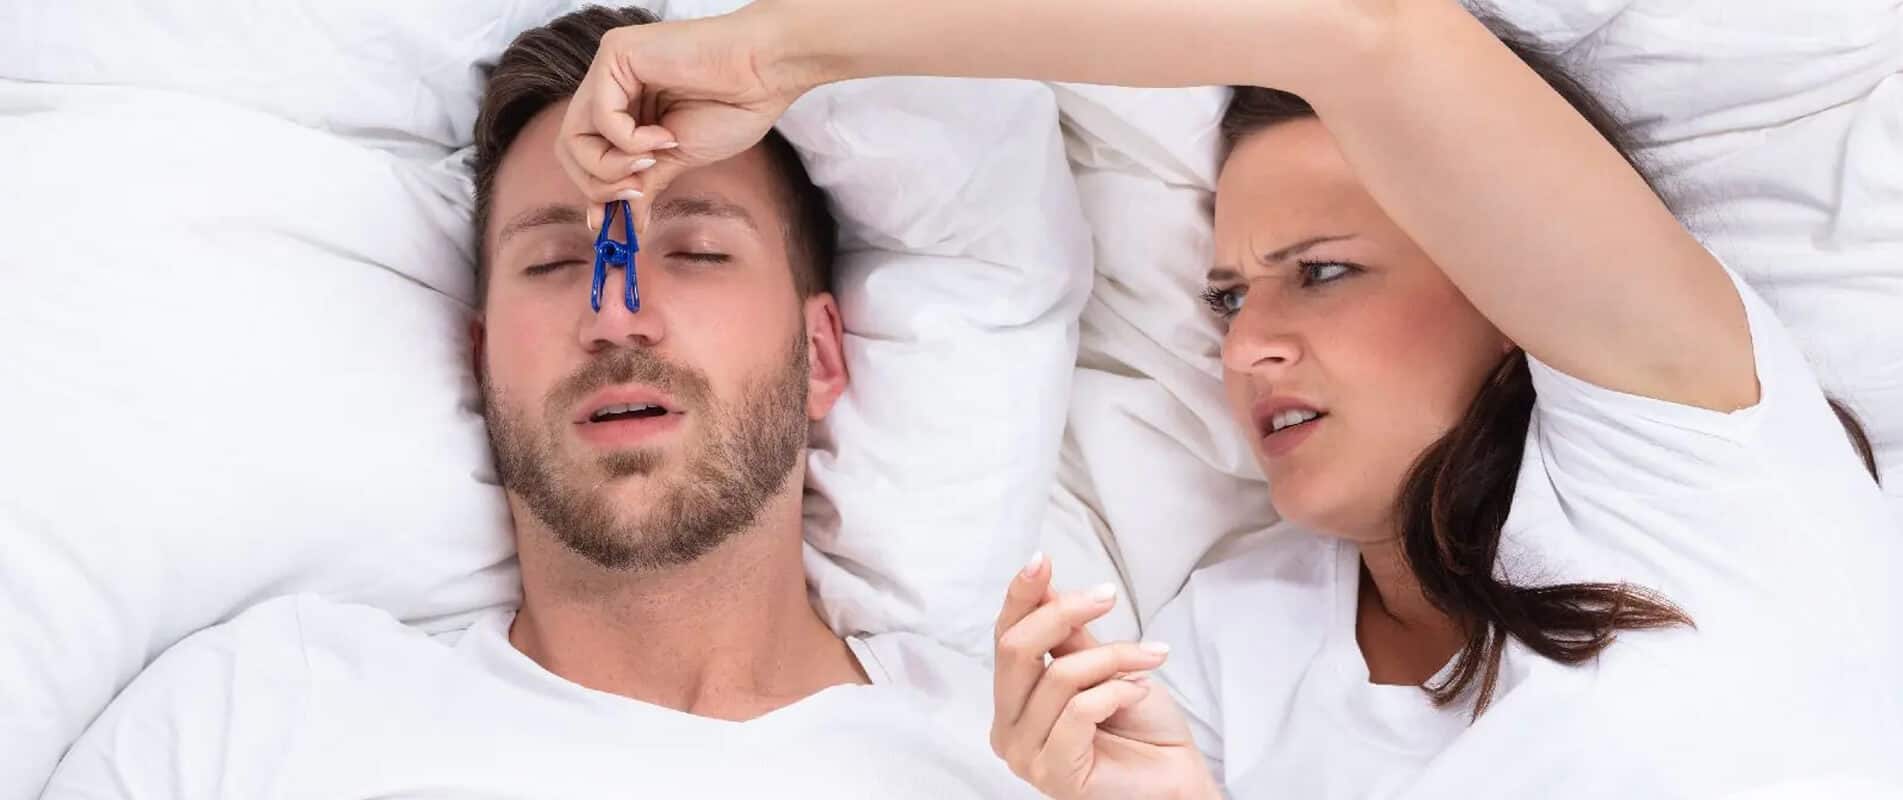 HOW TO STOP SNORING? What are the treatments?